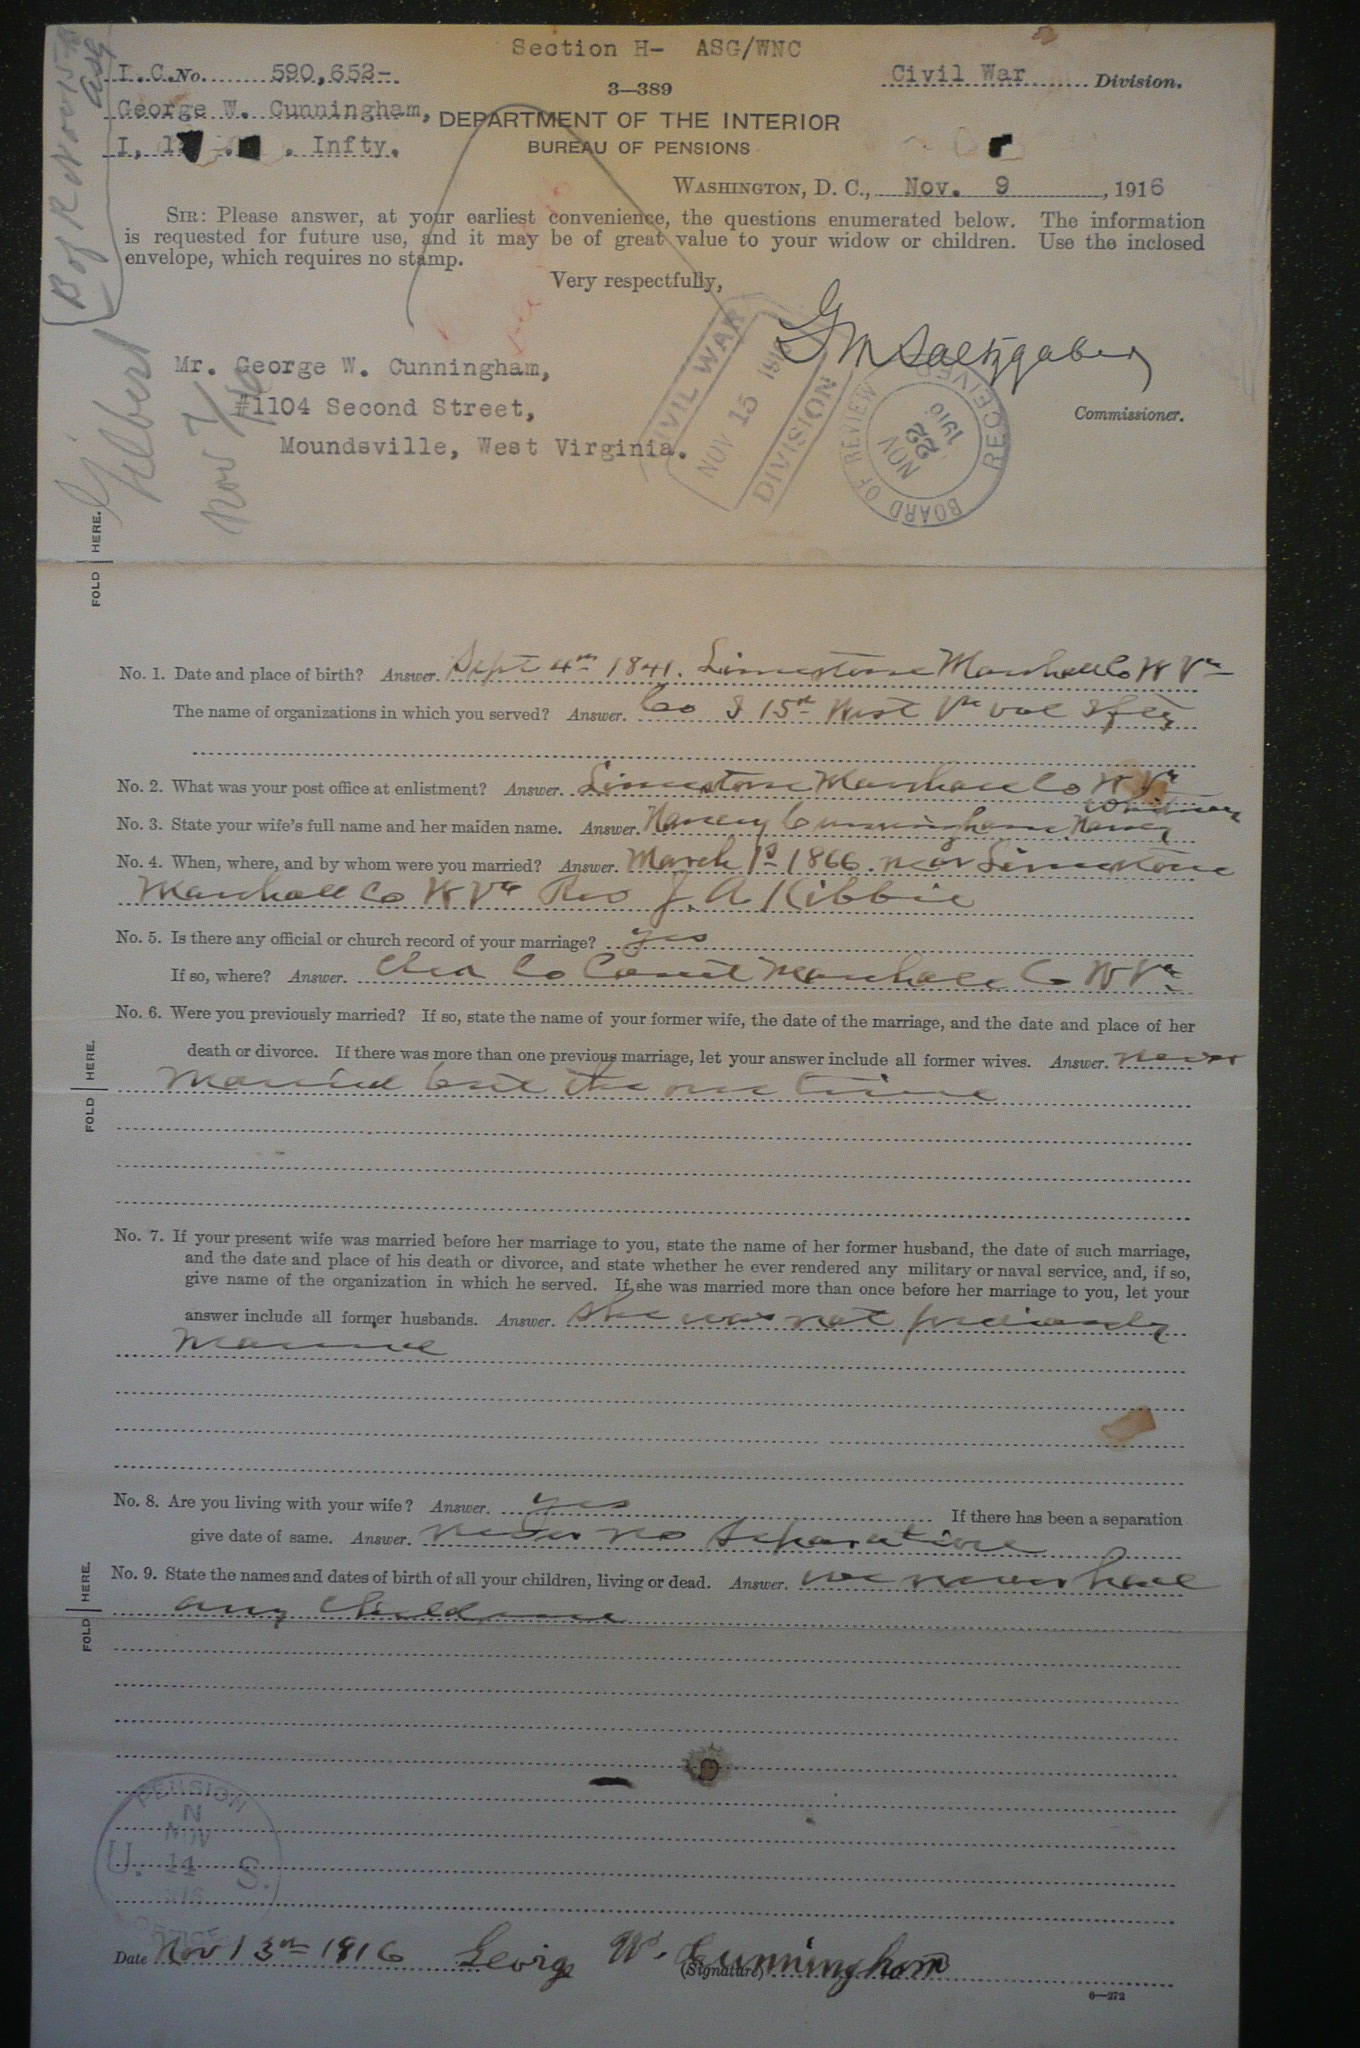 Reply to Inquiry, 1916